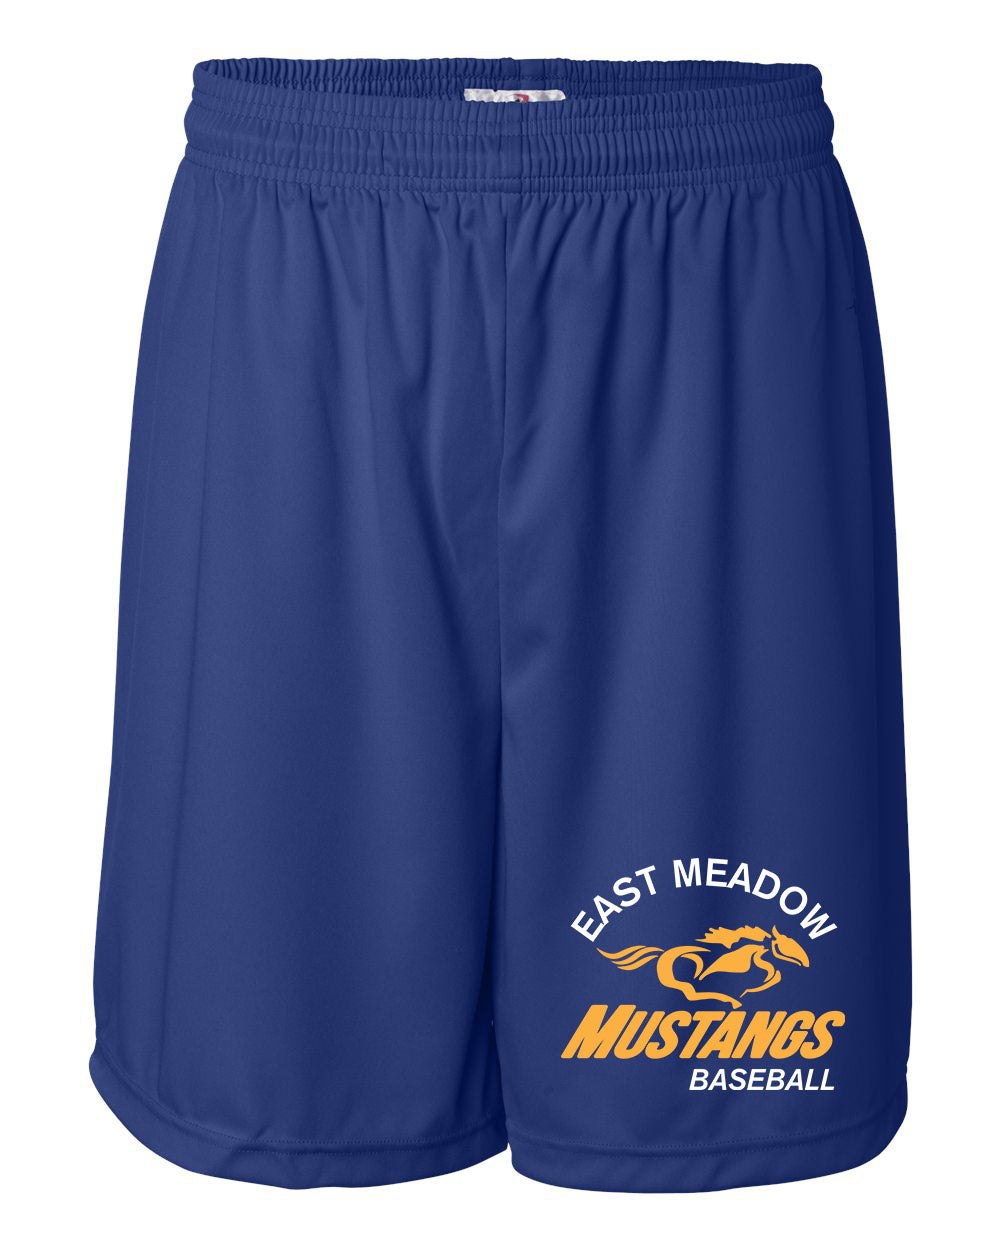 Mustangs Shorts (youth/adult)